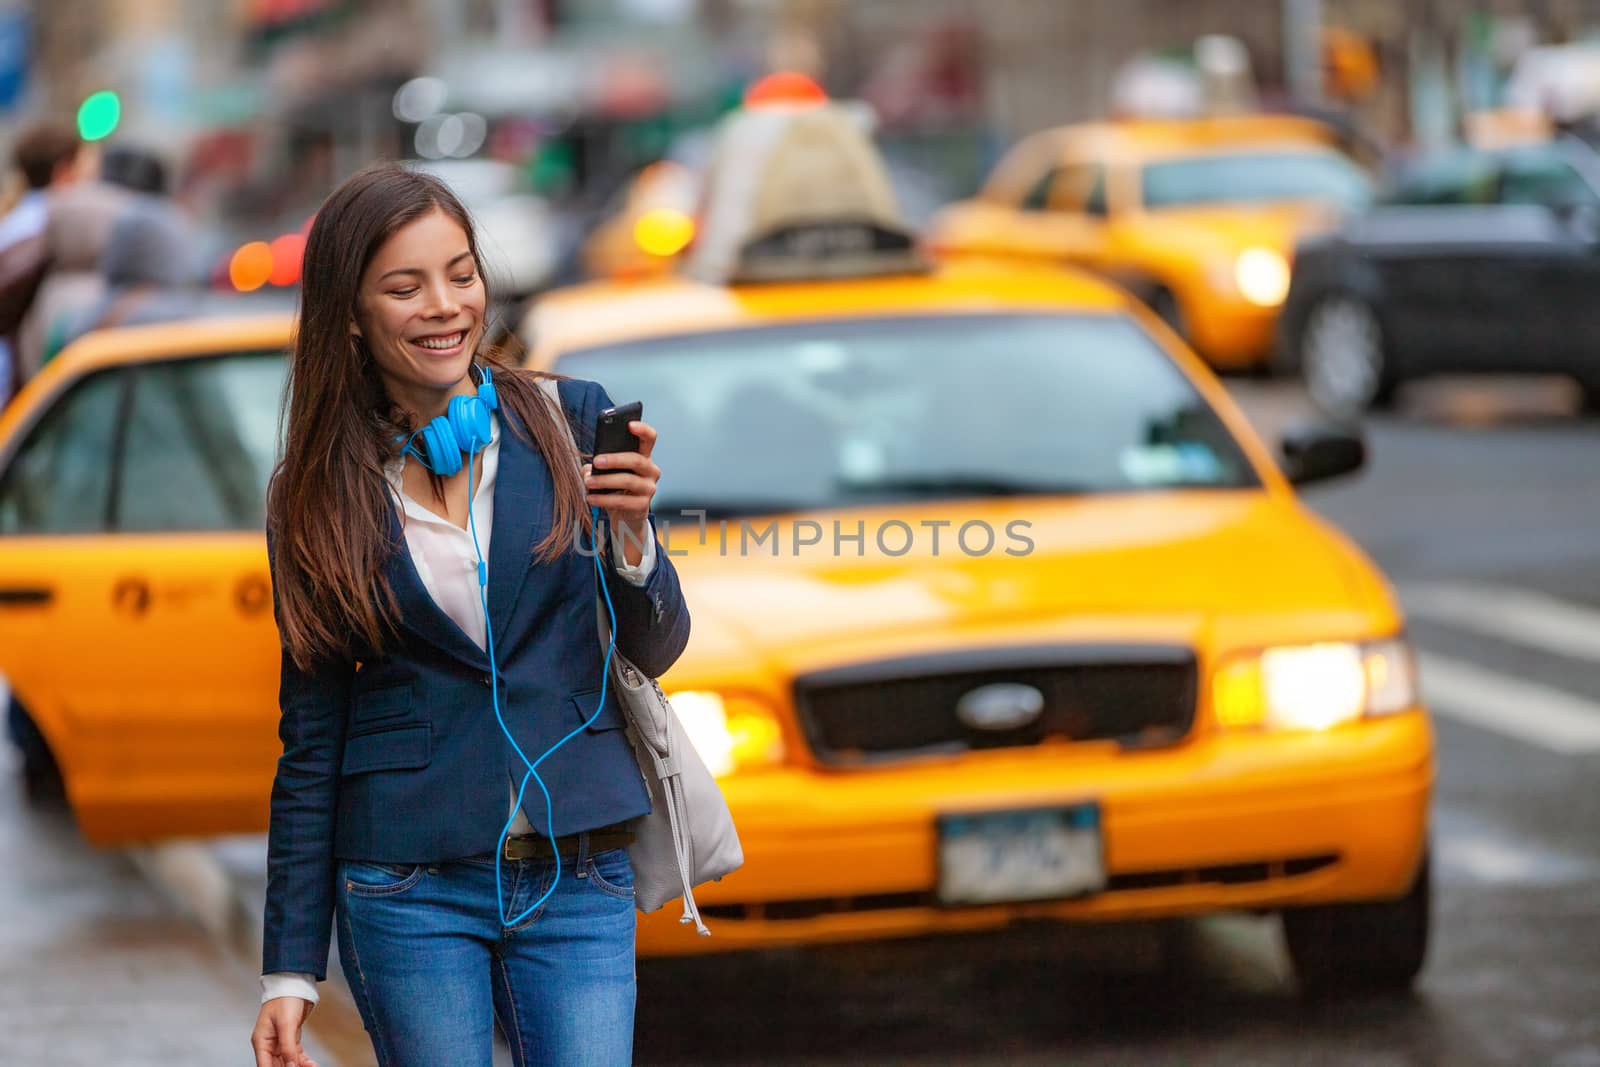 Young woman walking in New York city using phone app for taxi ride hailing with headphones commuting from work. Asian girl happy texting on smartphone. Urban walk commuter NYC by Maridav